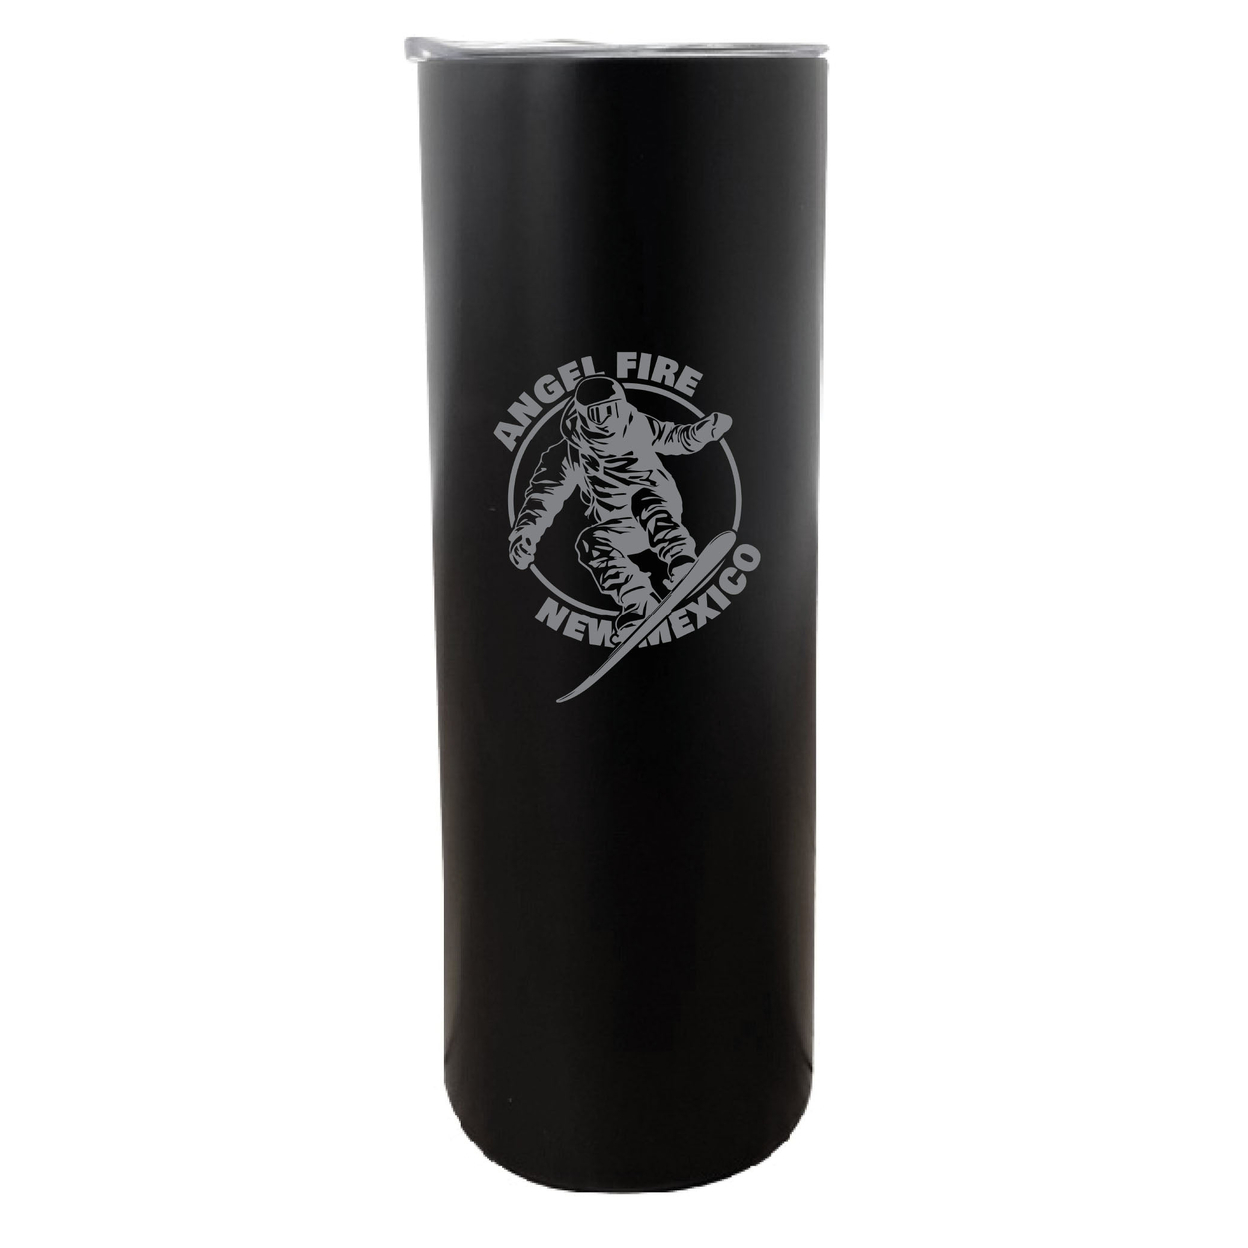 Angel Fire New Mexico Souvenir 20 Oz Engraved Insulated Stainless Steel Skinny Tumbler - Black,,Single Unit